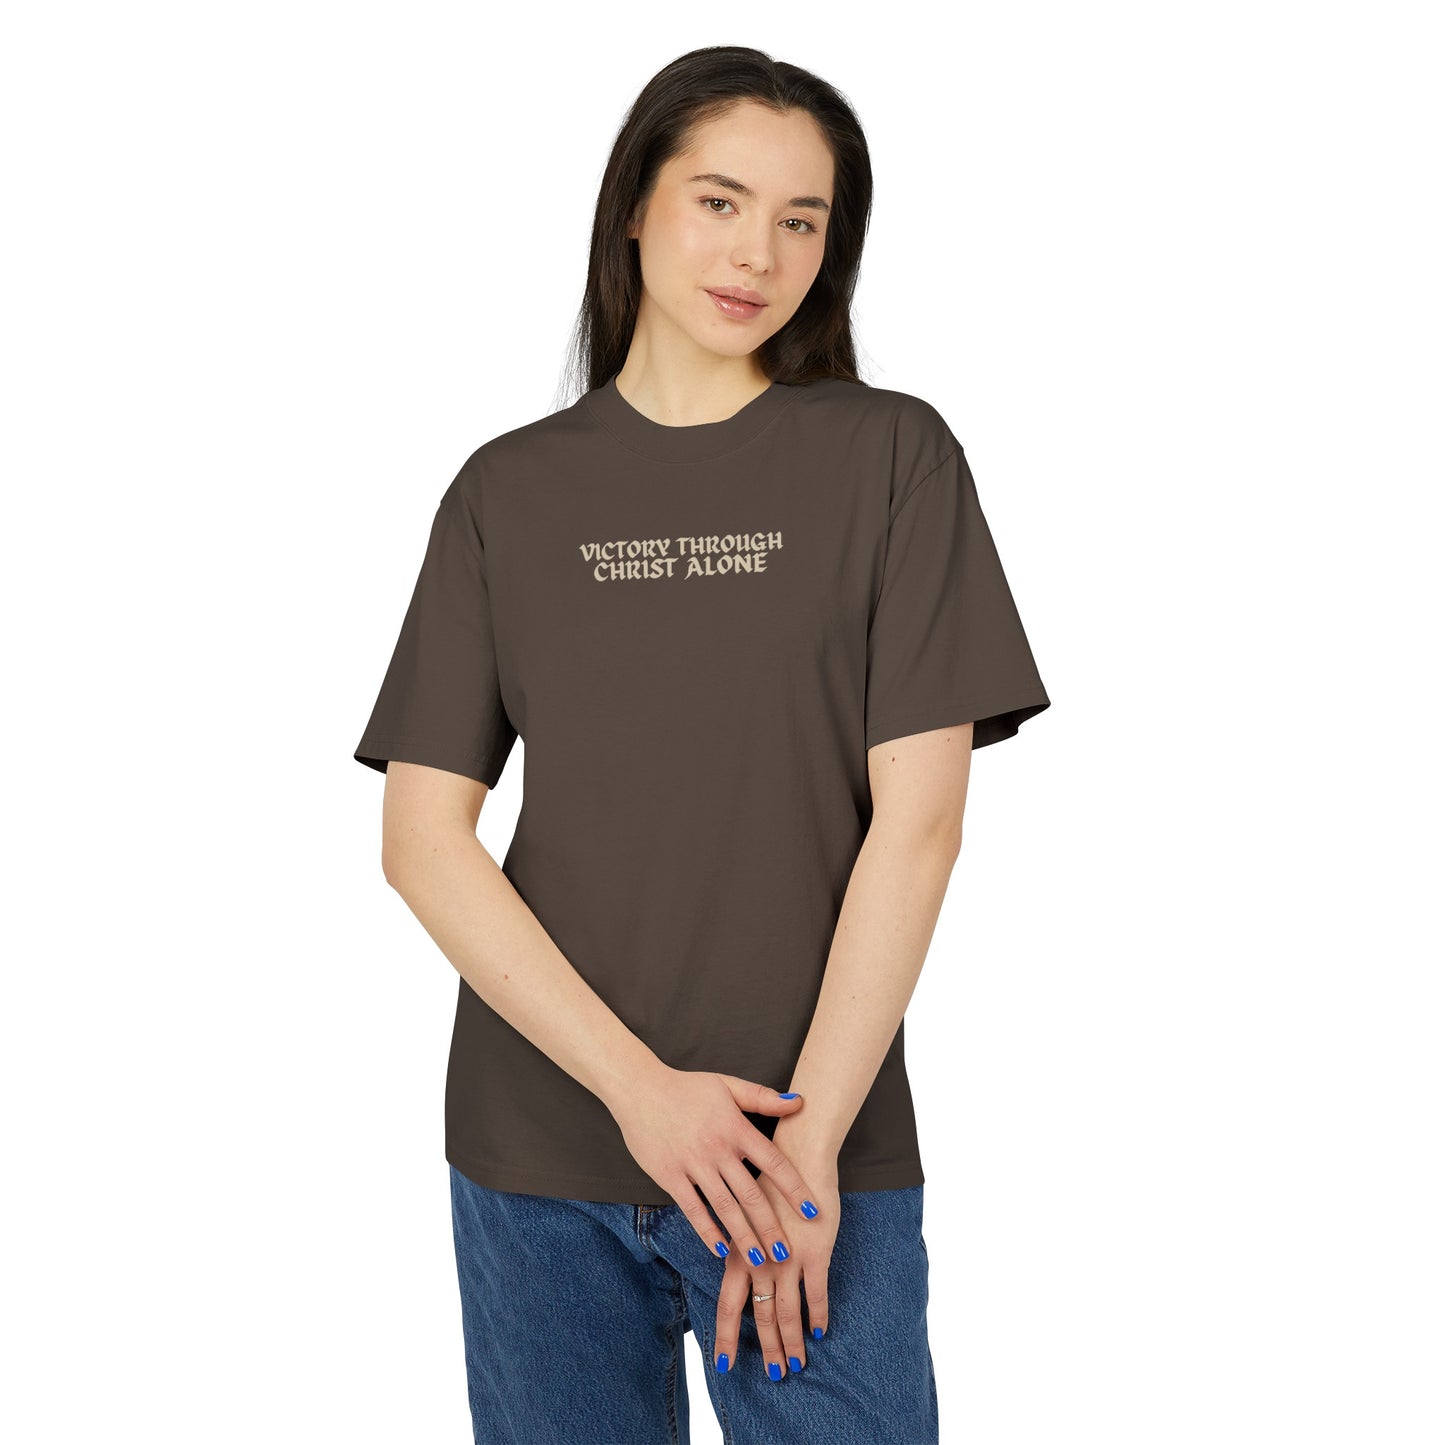 UNBROKEN VALY T-Shirt - Faded Brown